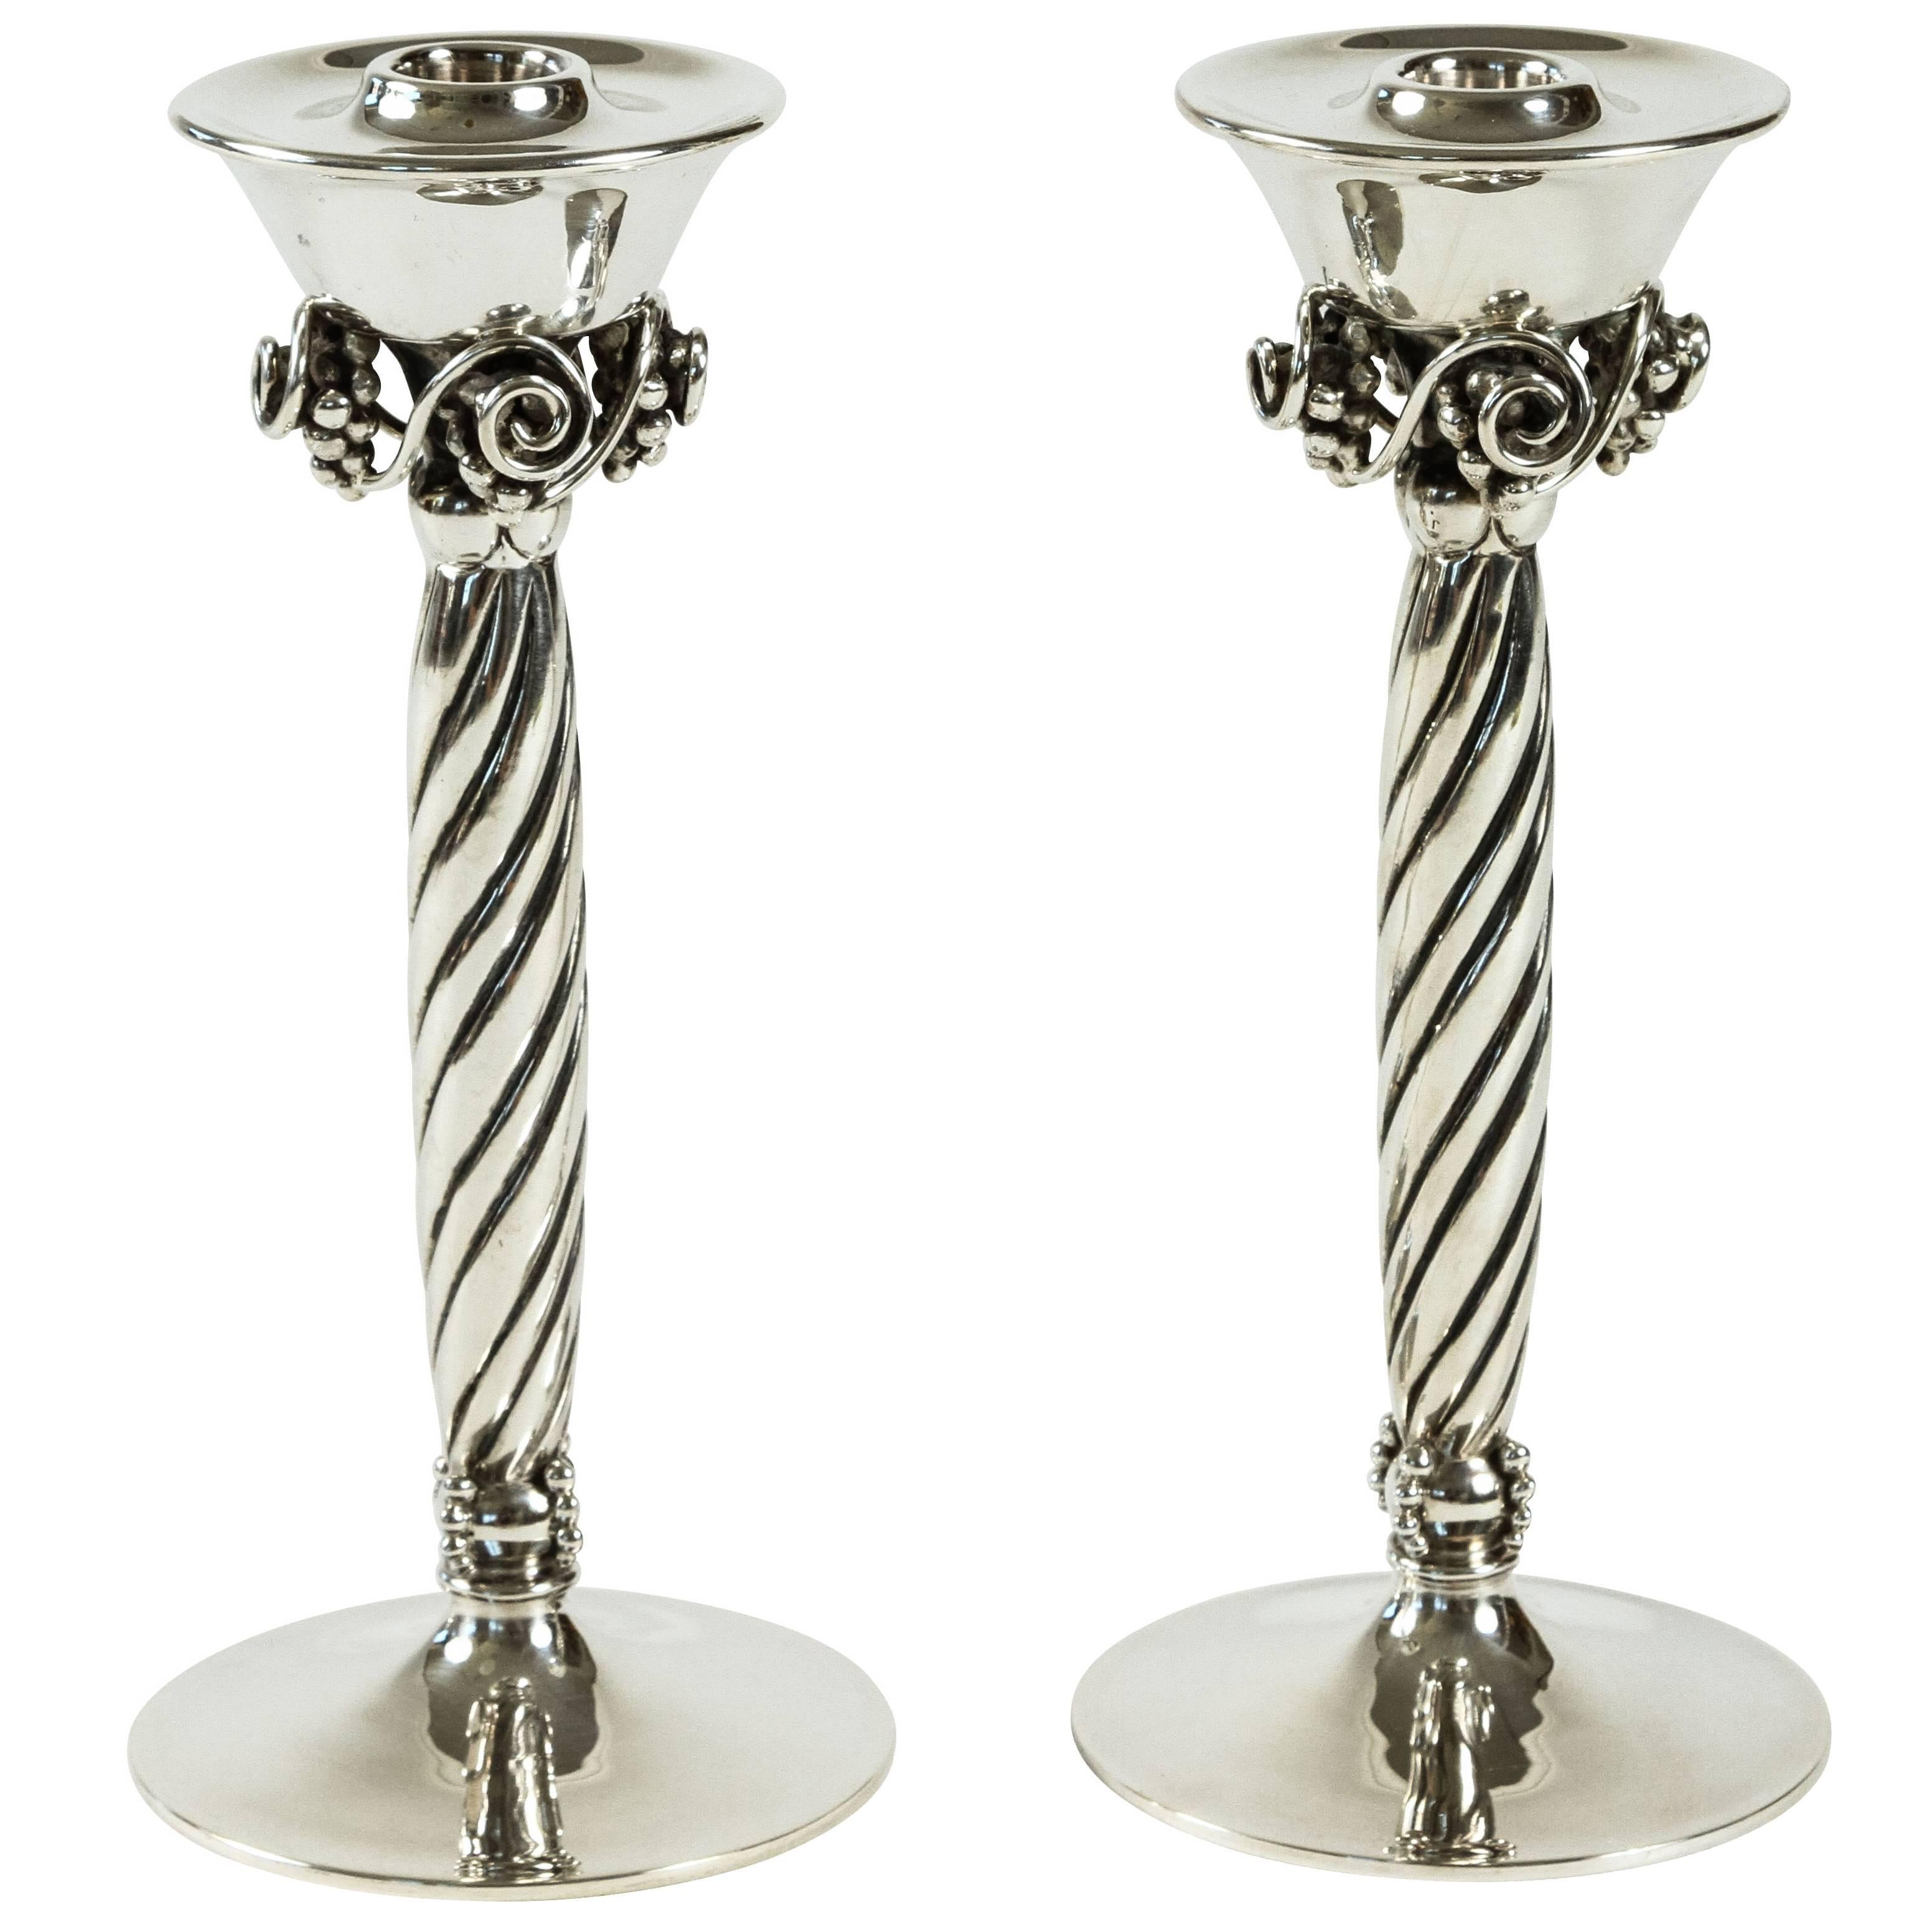 Pair of Sterling Silver Candlesticks by Bernice Goodspeed